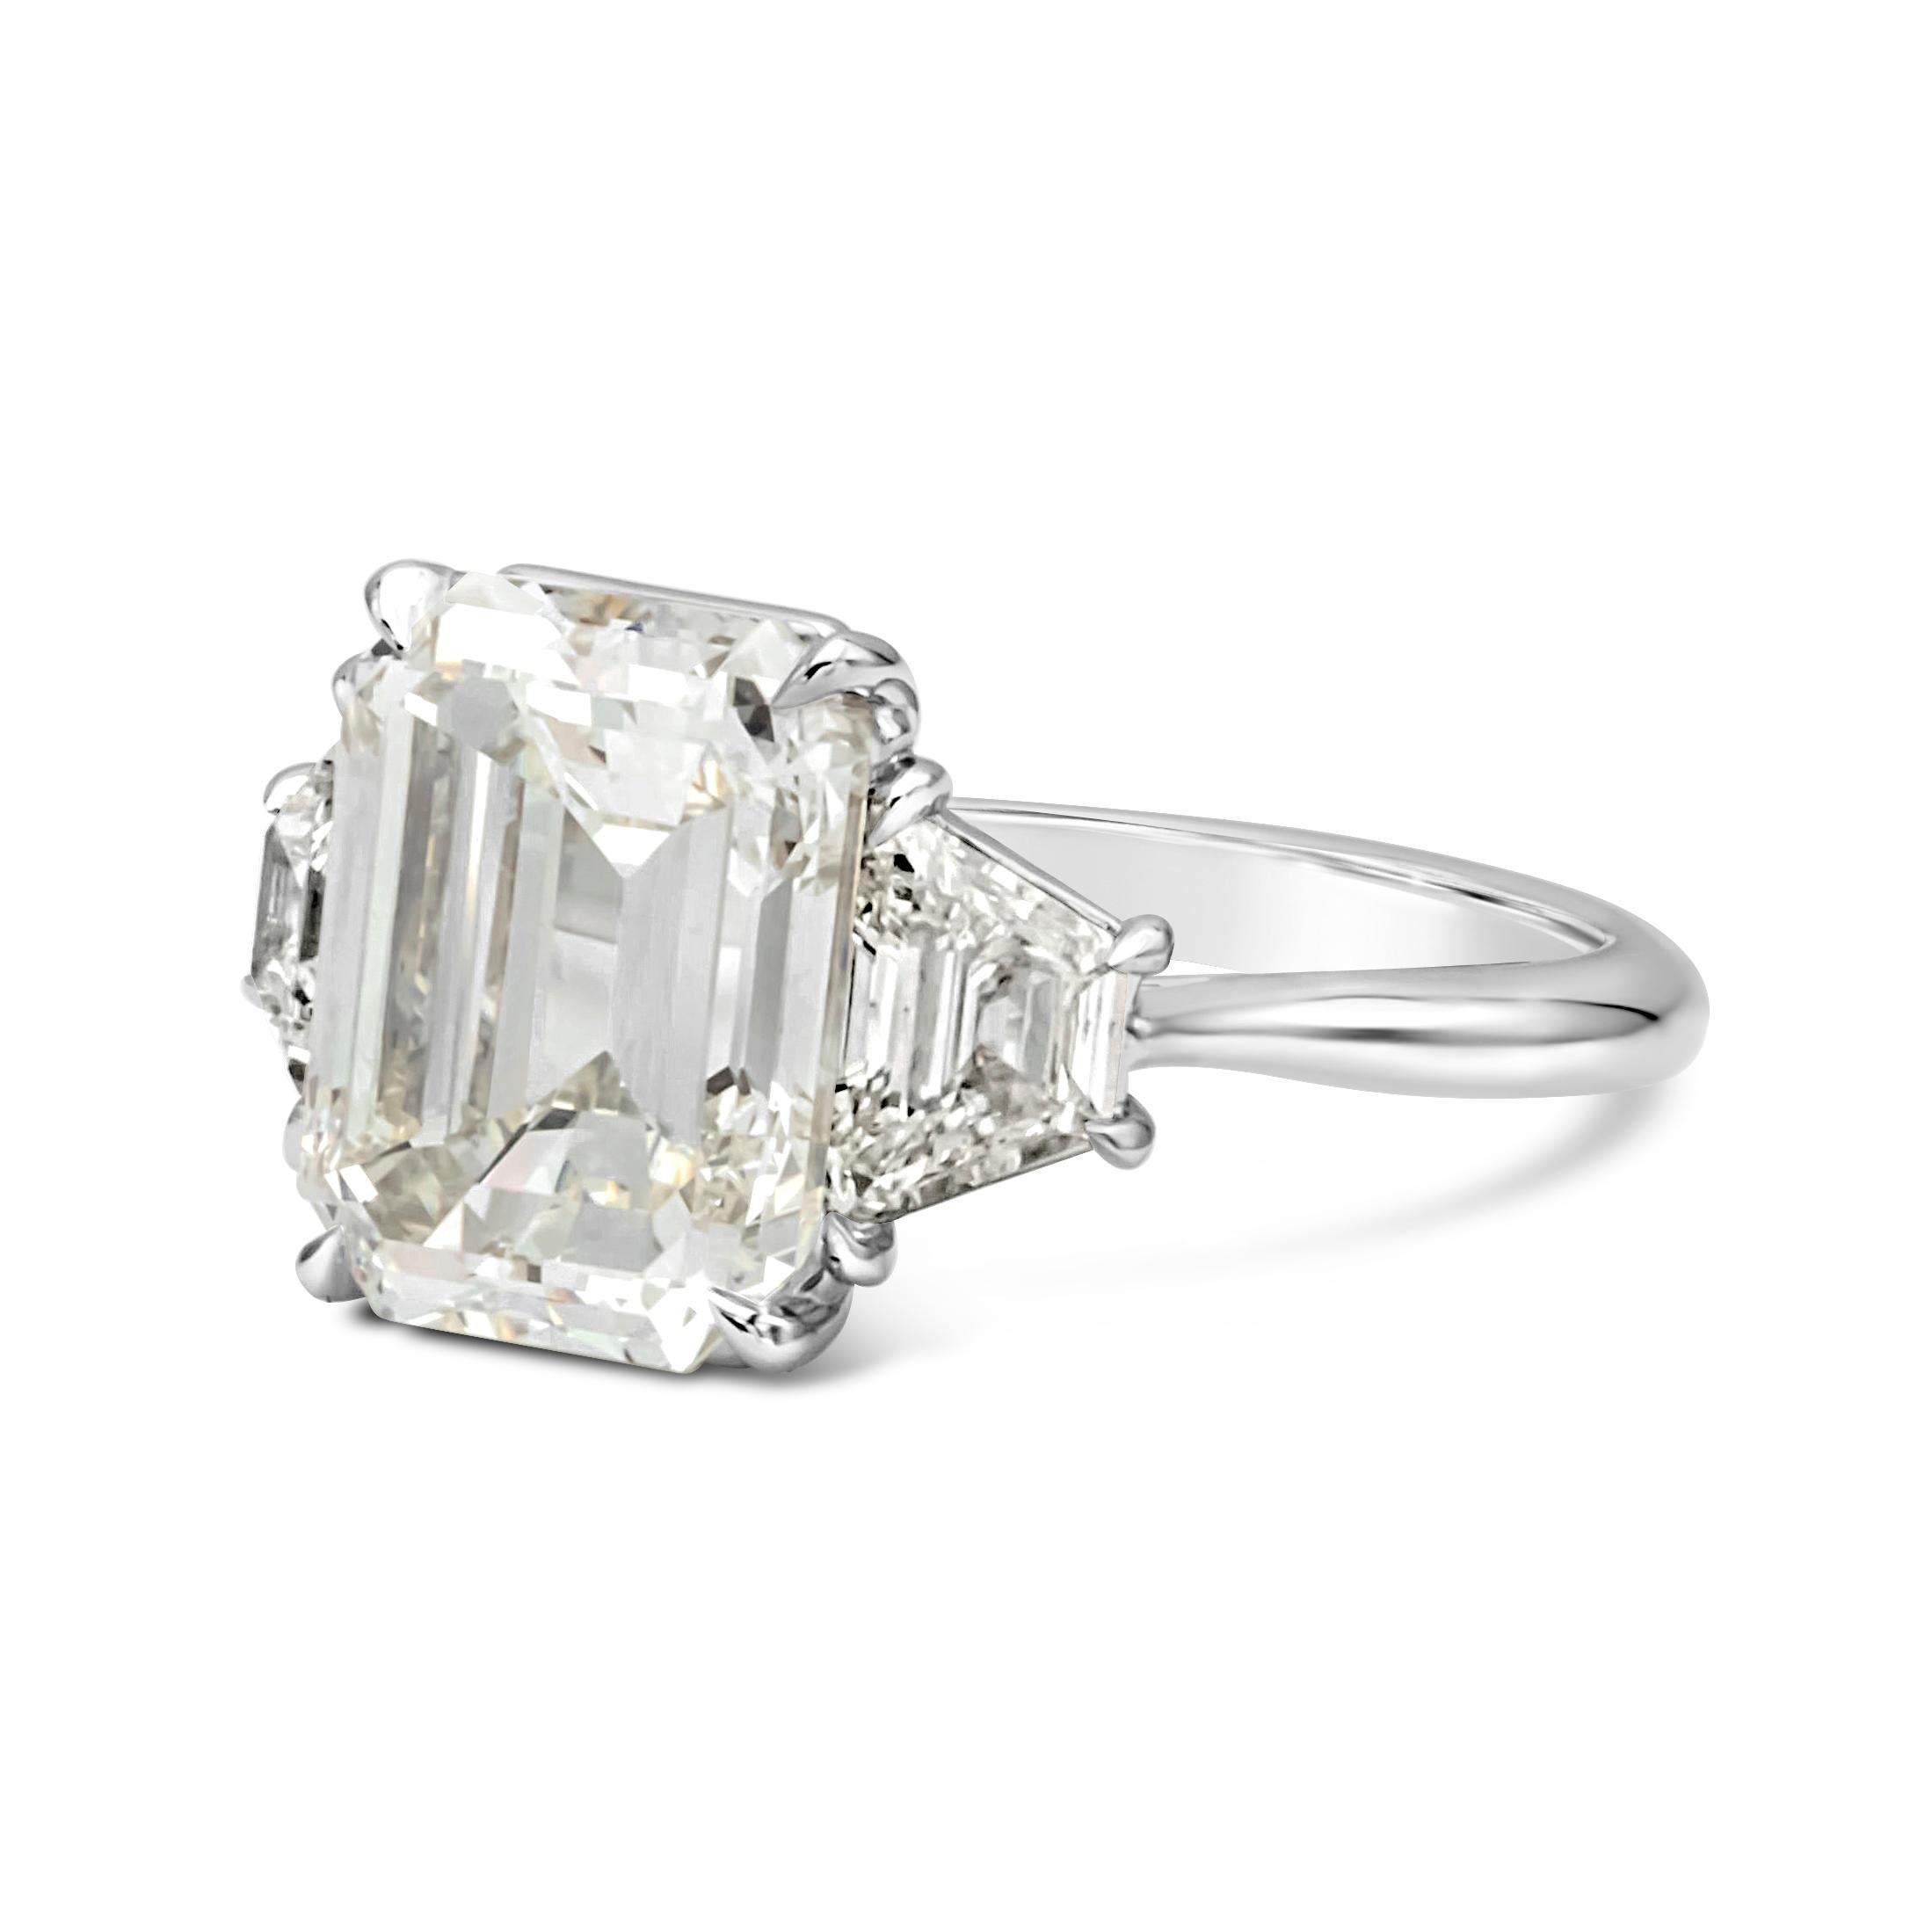 Elegantly made three stone engagement ring features a 5.81 carats emerald cut diamond certified by GIA as K color, VS2 in clarity, set in platinum four prong setting. Flanked by trillion cut diamonds on each side, weighing 1.10 carats total, J-K